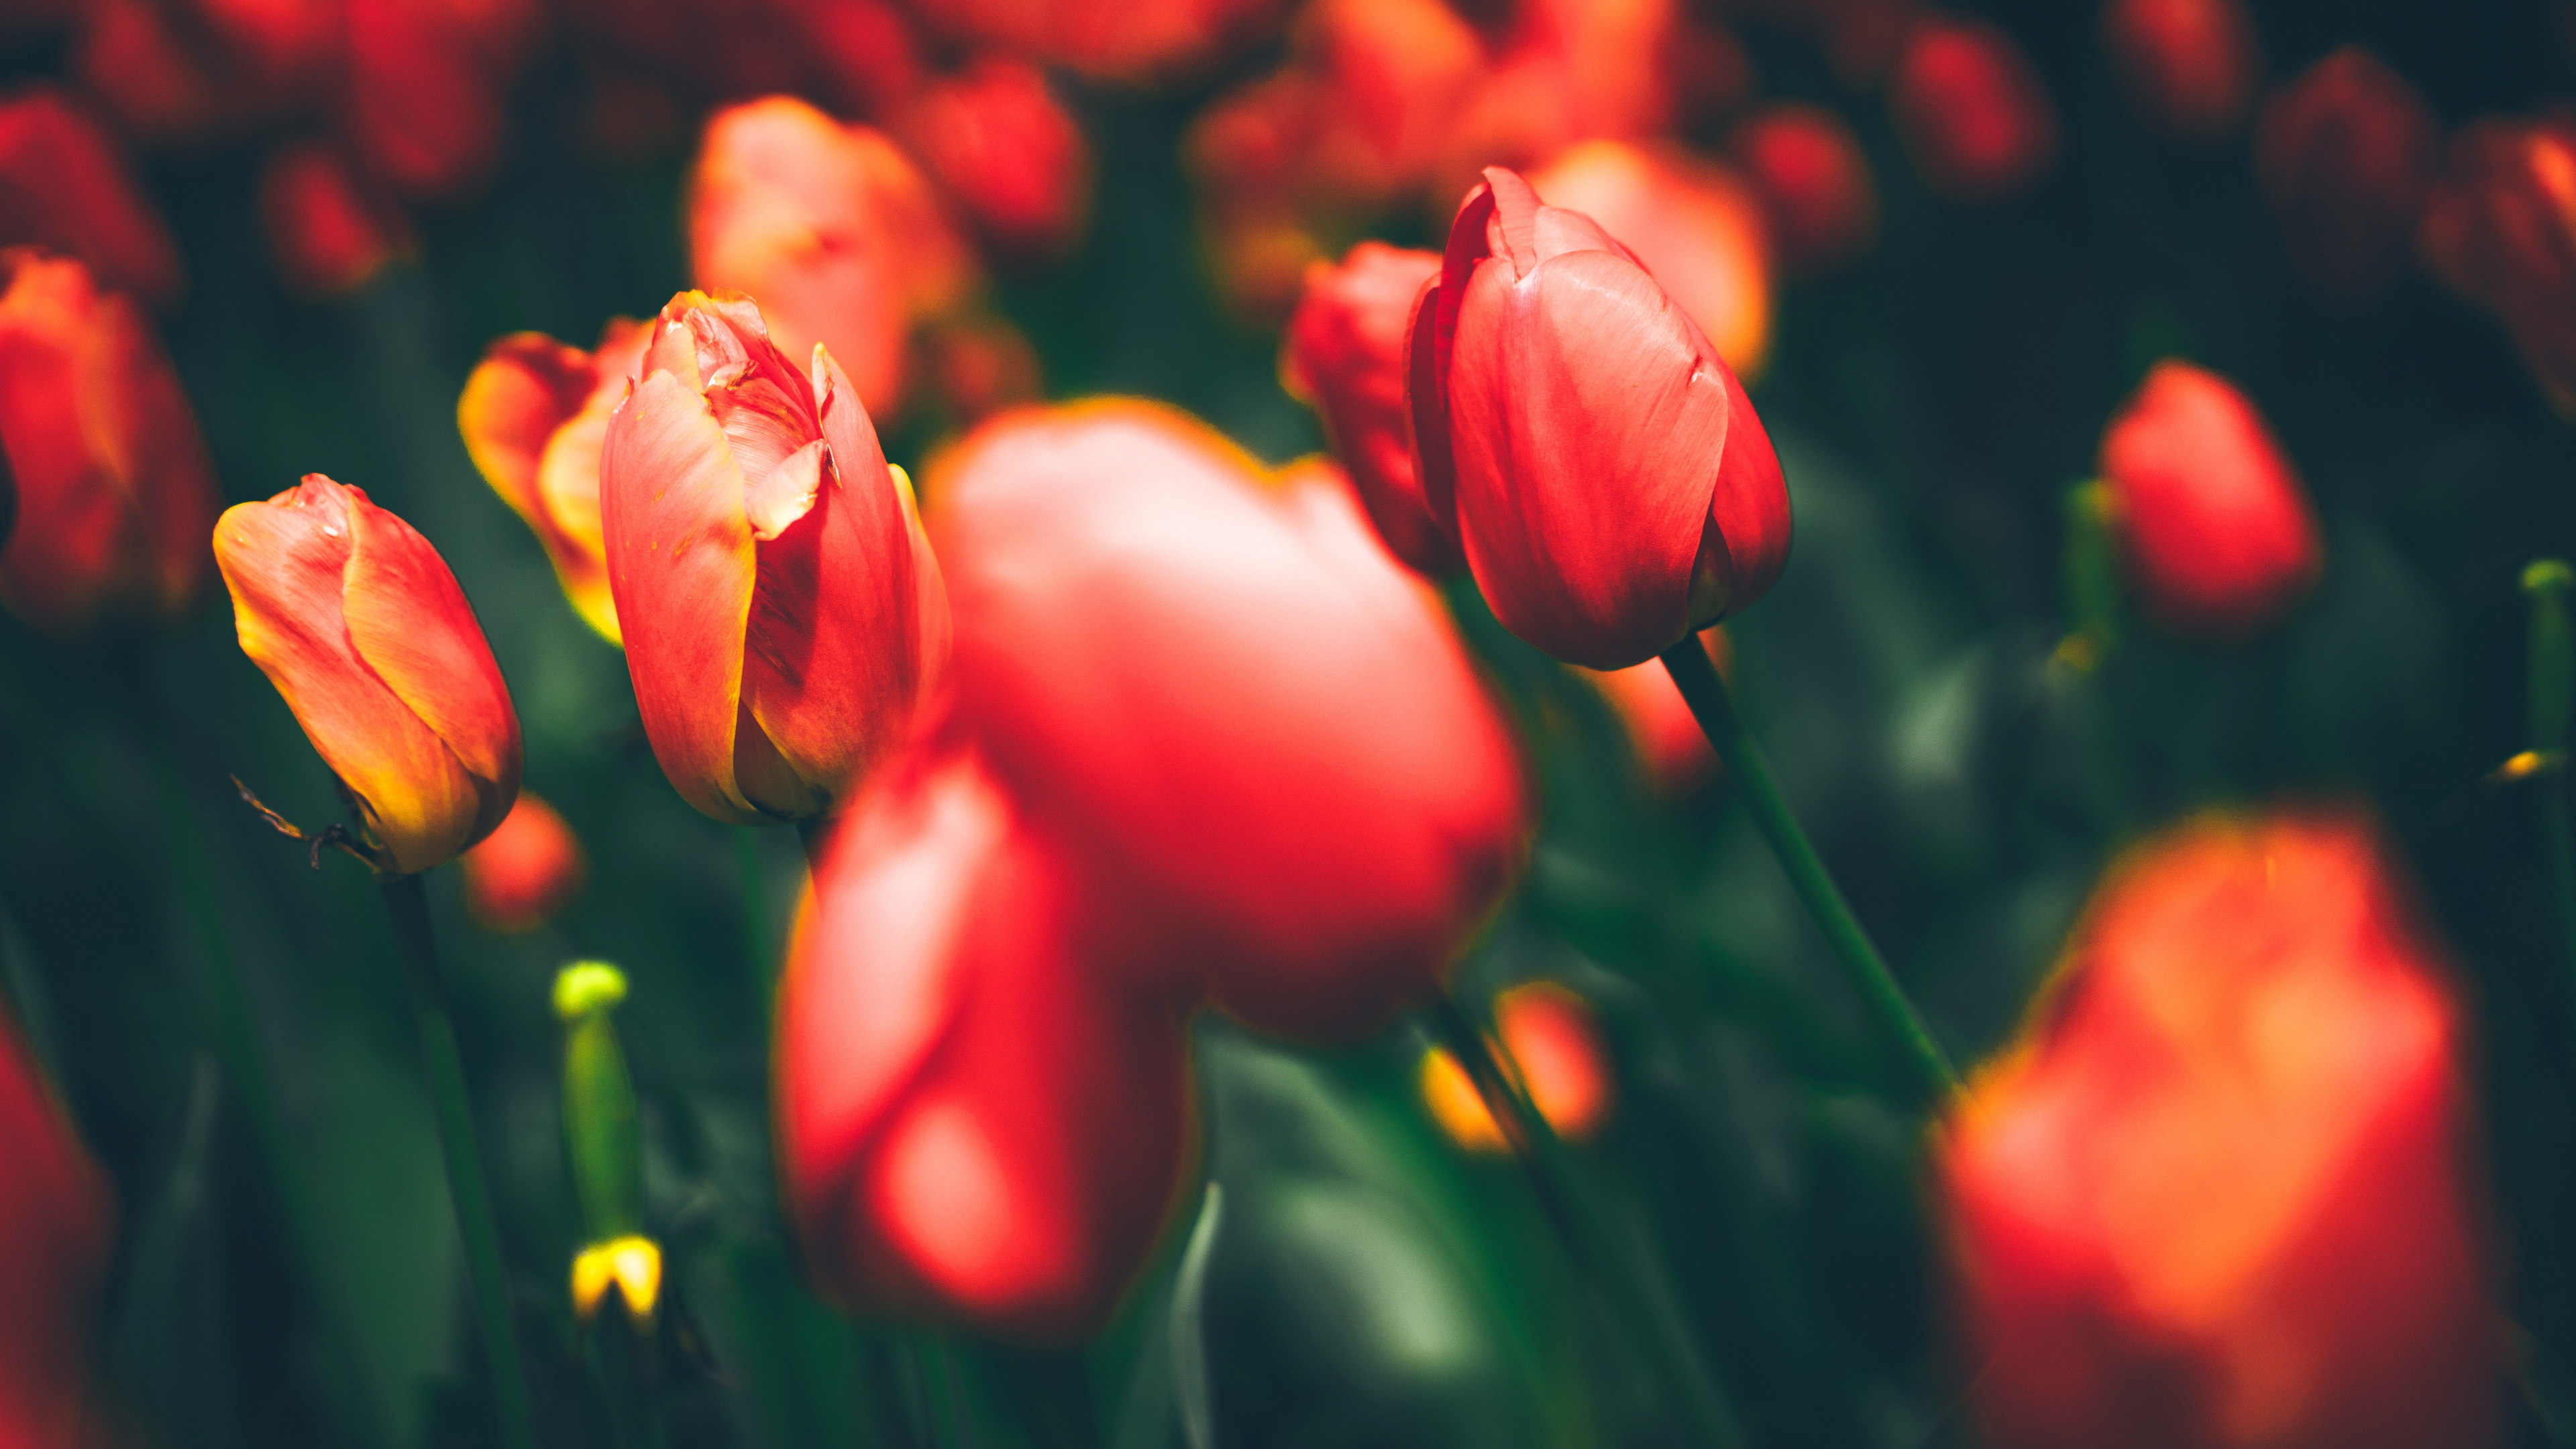 Red Tulips in Bloom During Daytime. Wallpaper in 3840x2160 Resolution